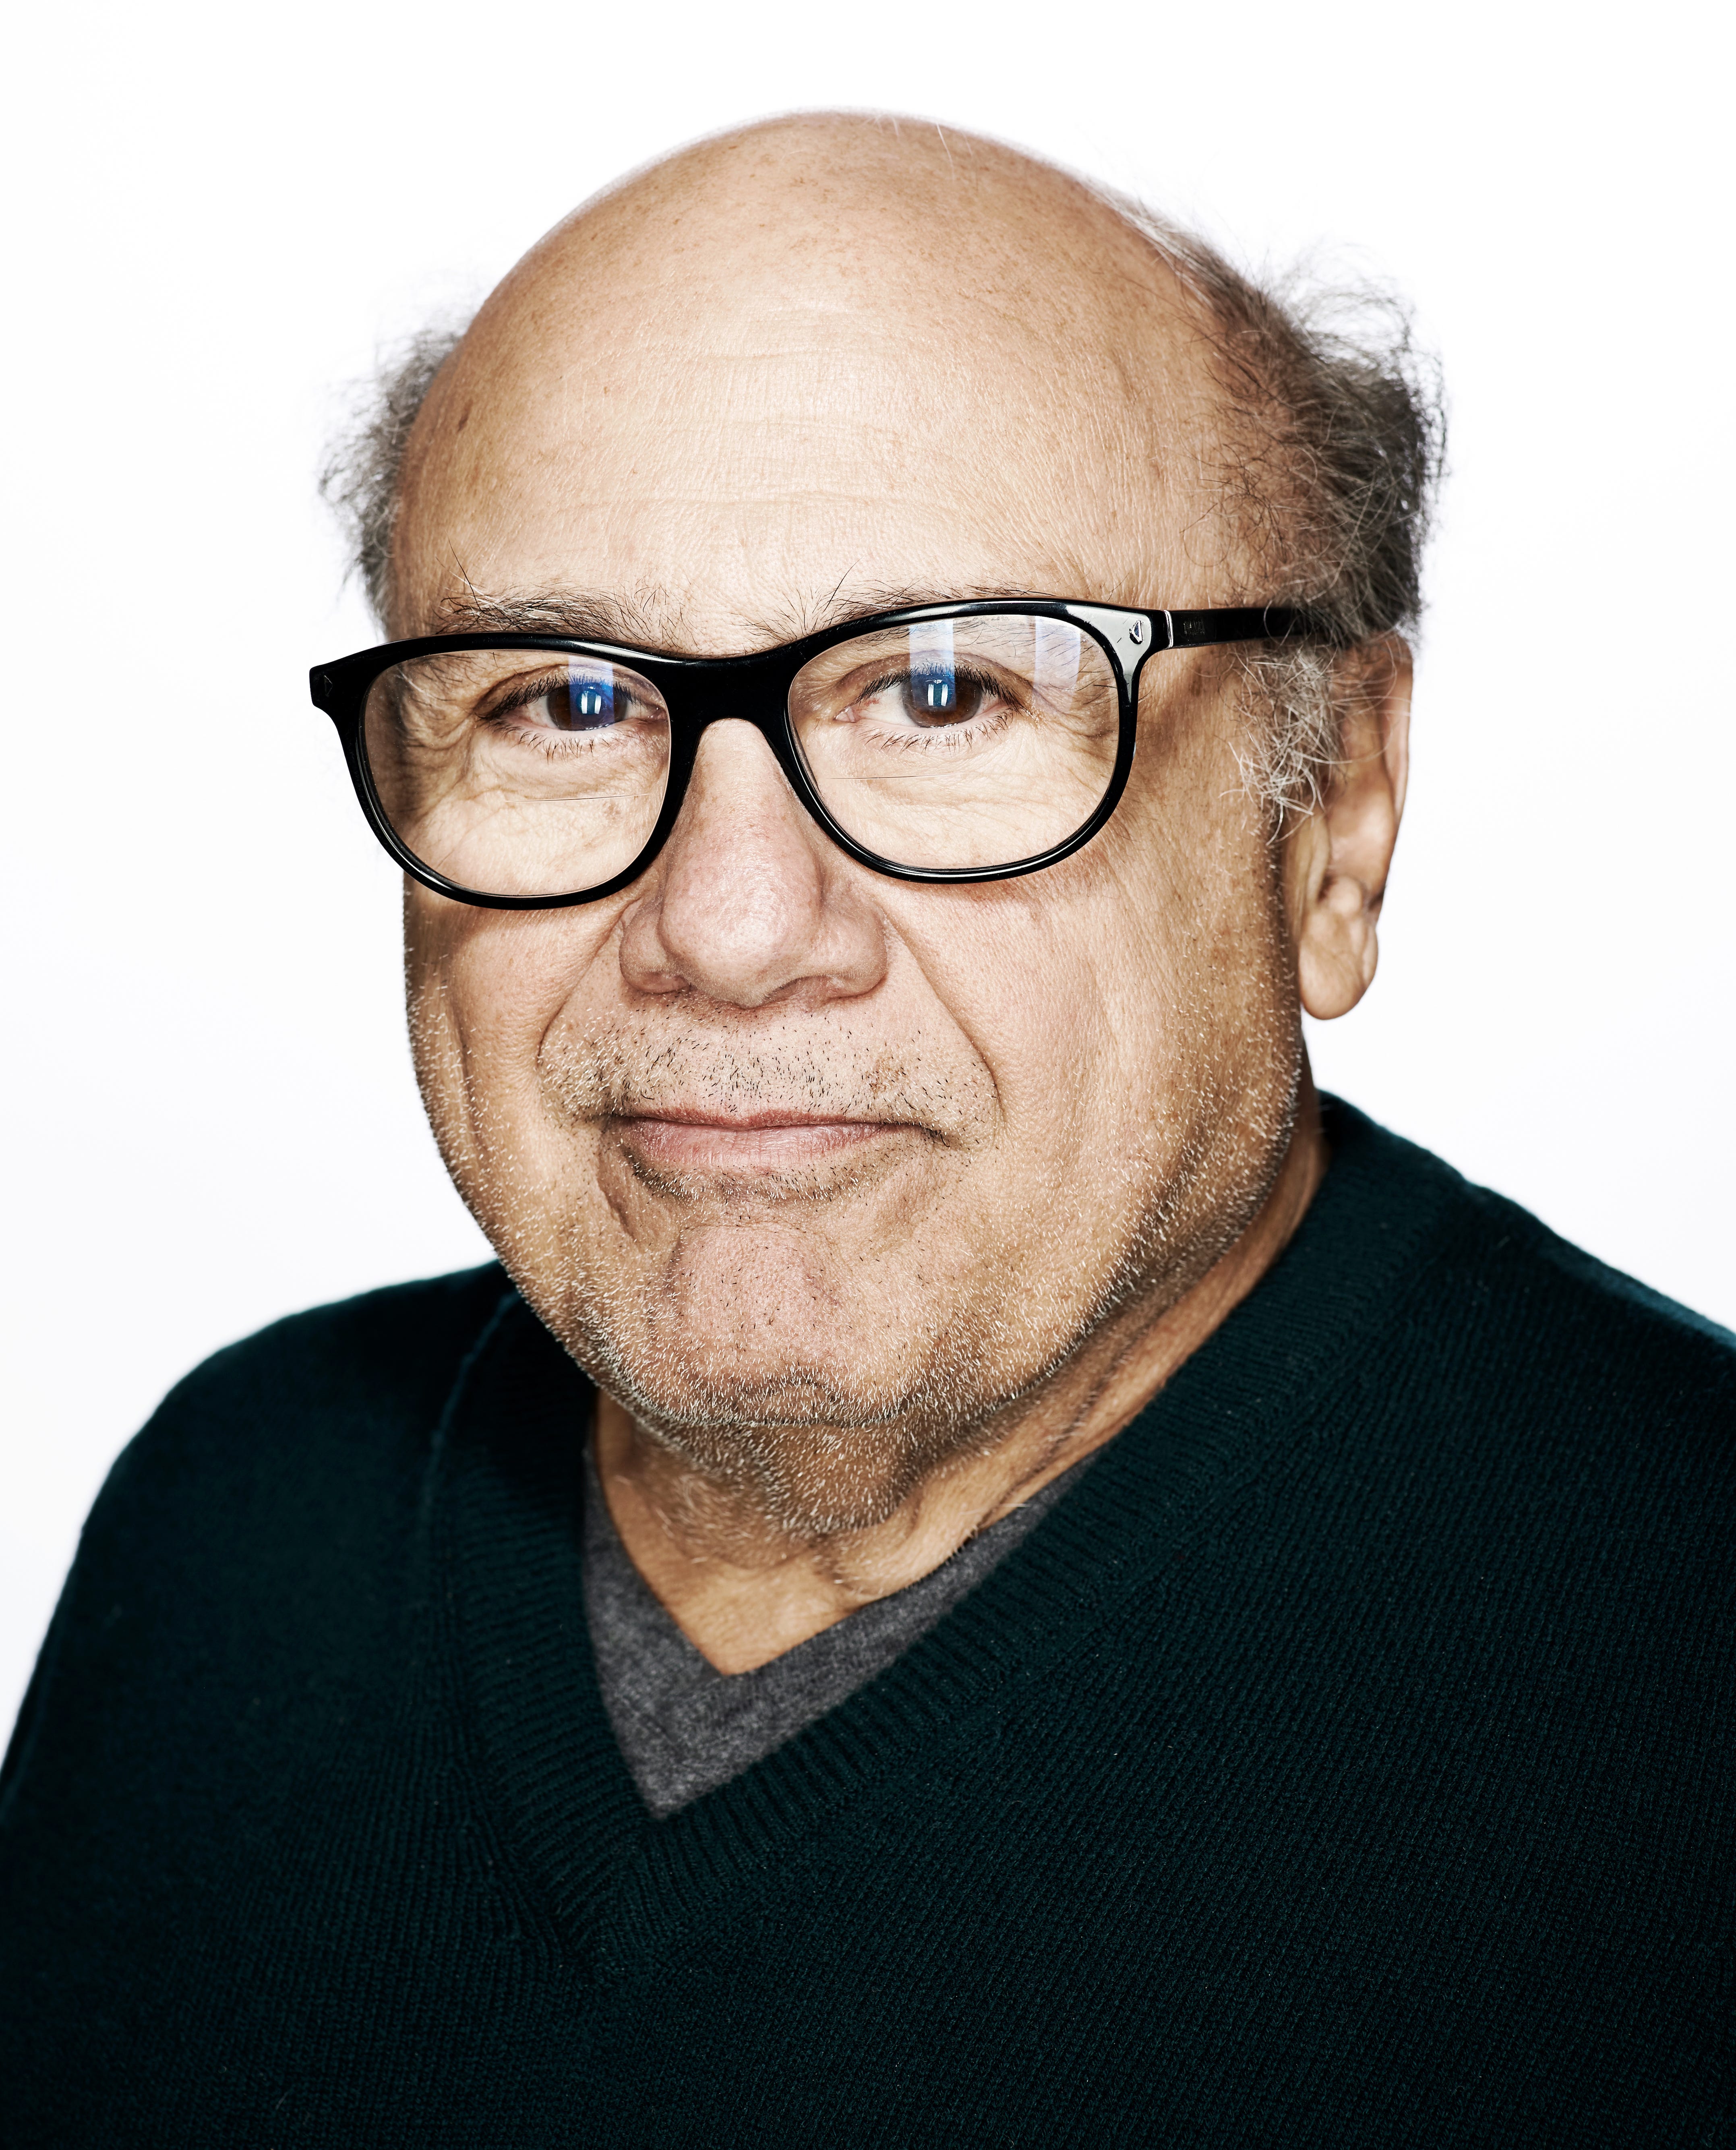 Danny DeVito and Wyclef Jean, self-proclaimed Jersey people, heading to Asbury Park fest